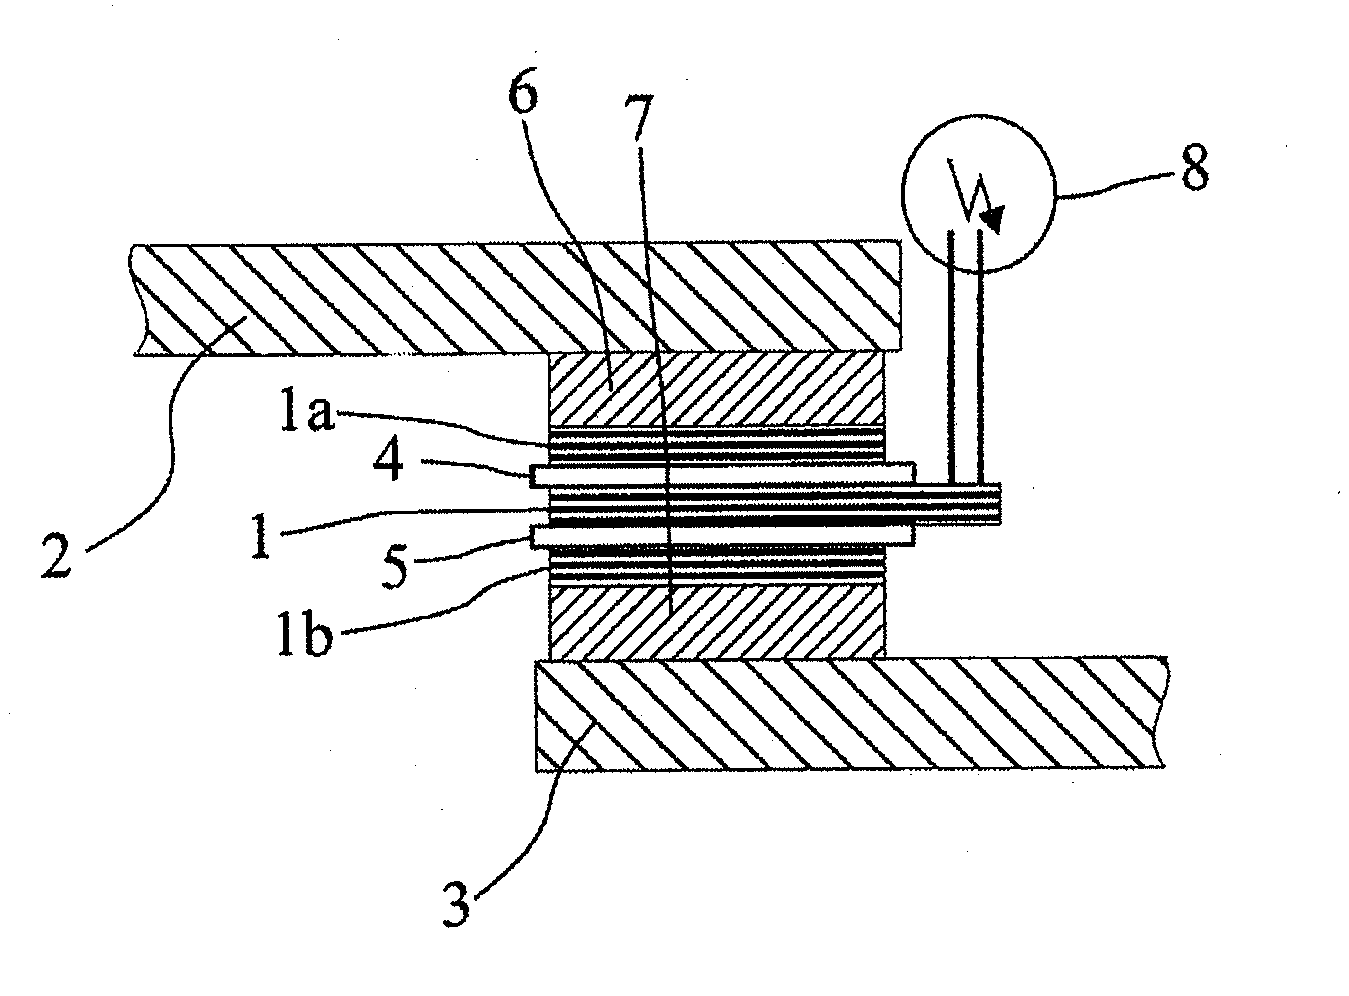 Electrical bypass element, in particular for storage cells of an energy storage device